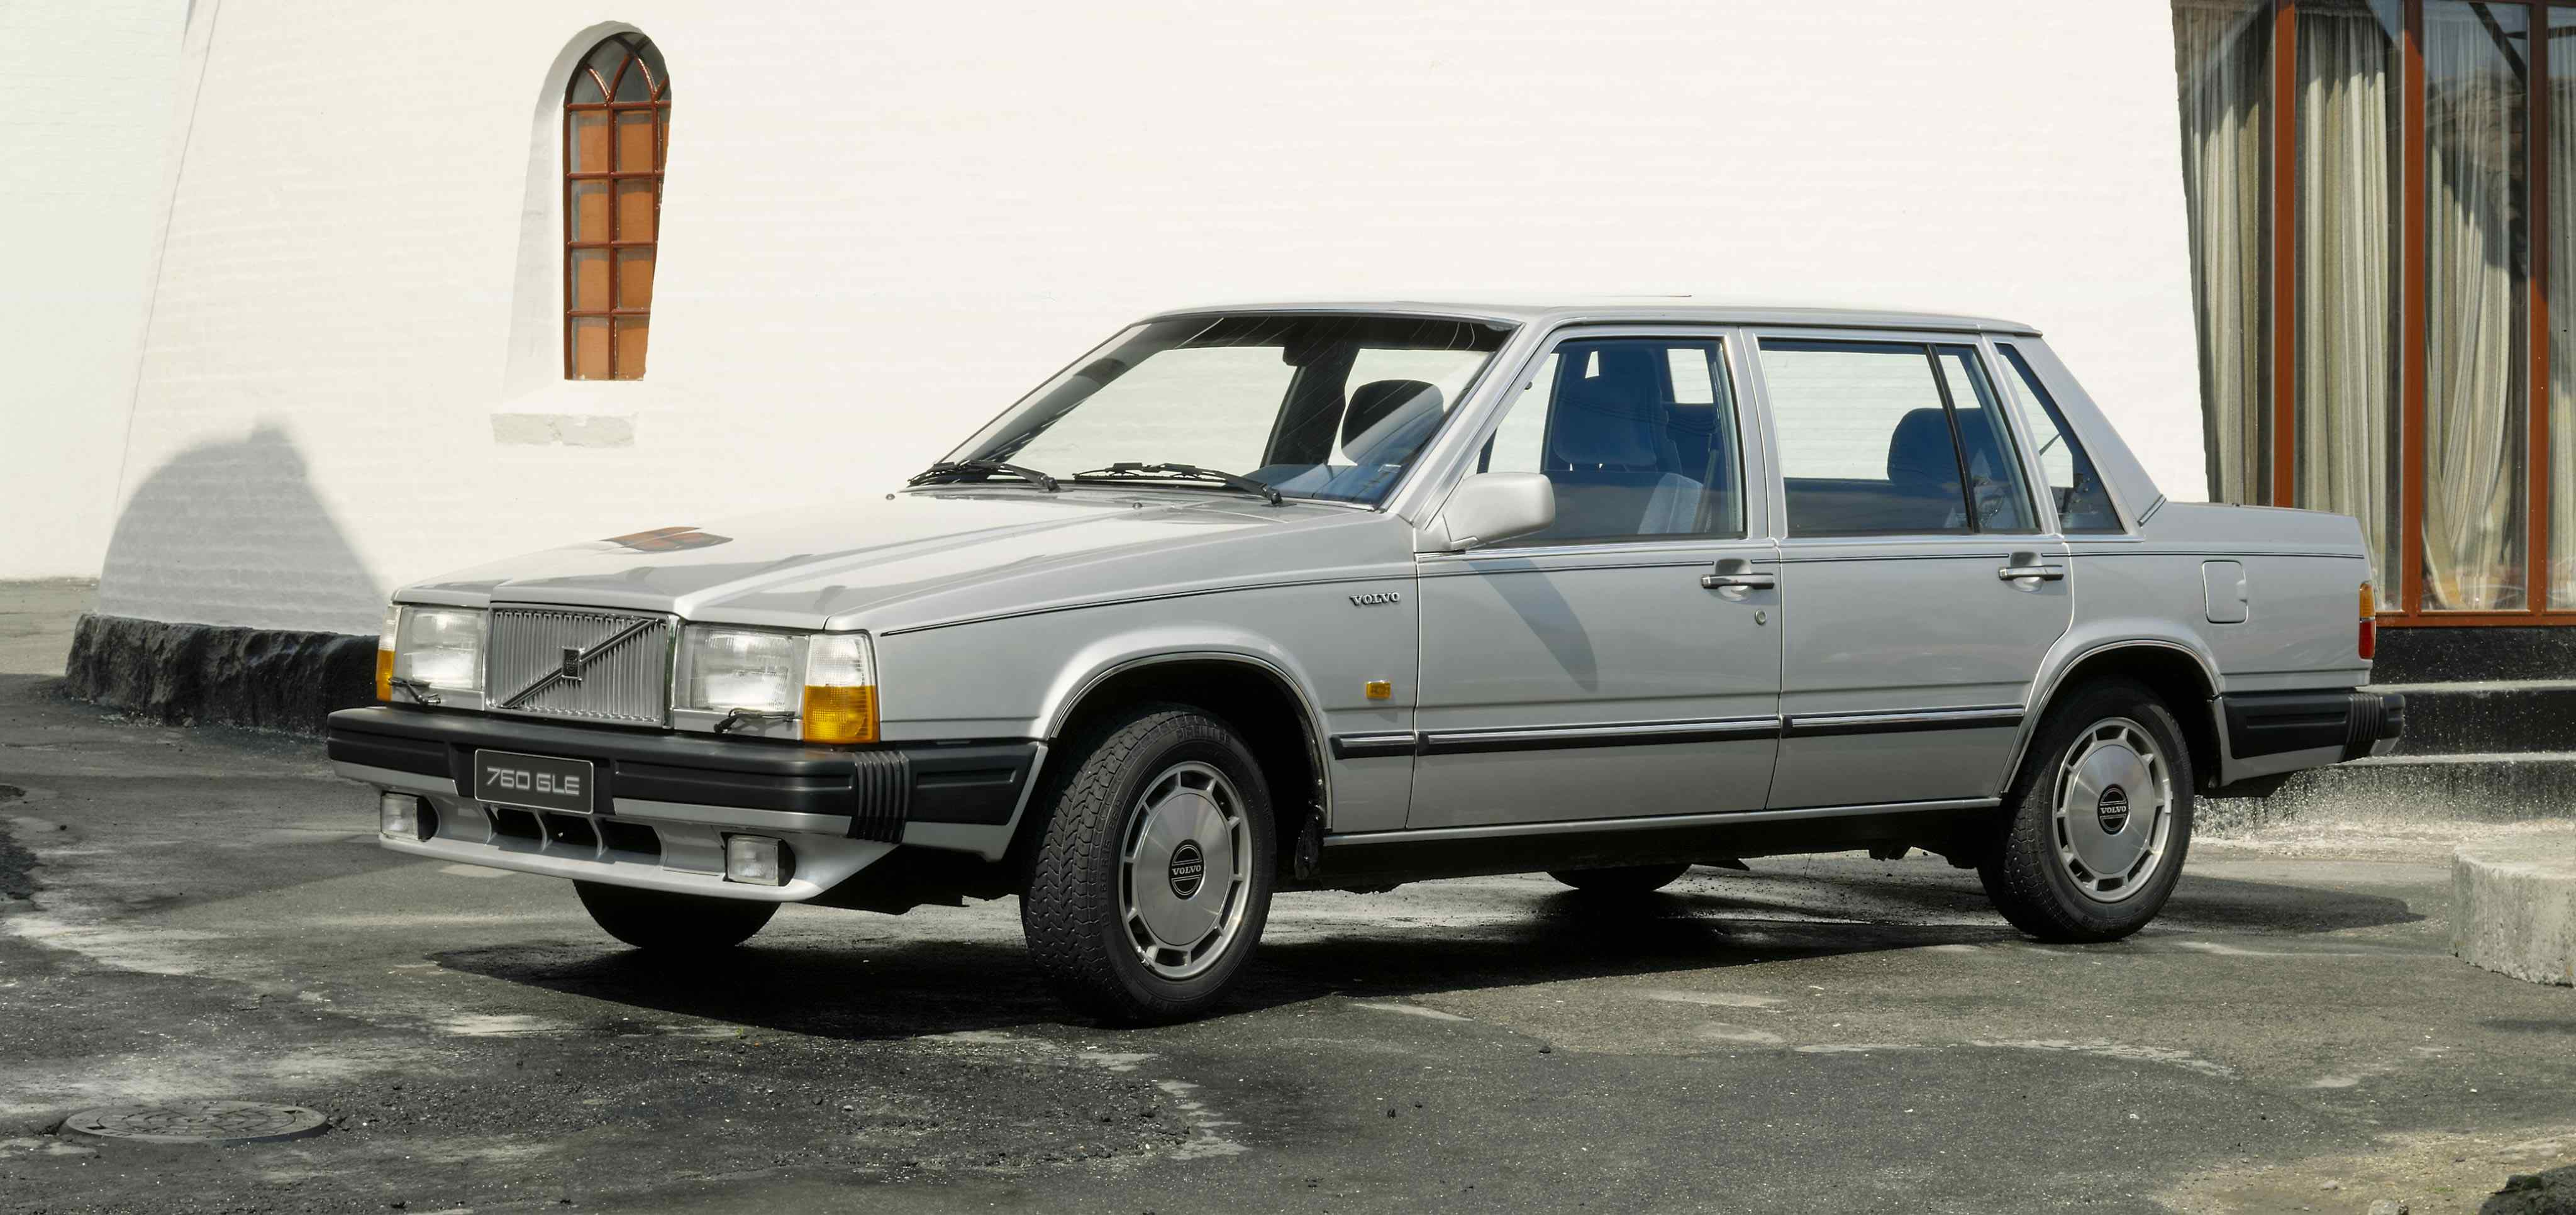 A silver Volvo 760 sedan parked in front of a white building